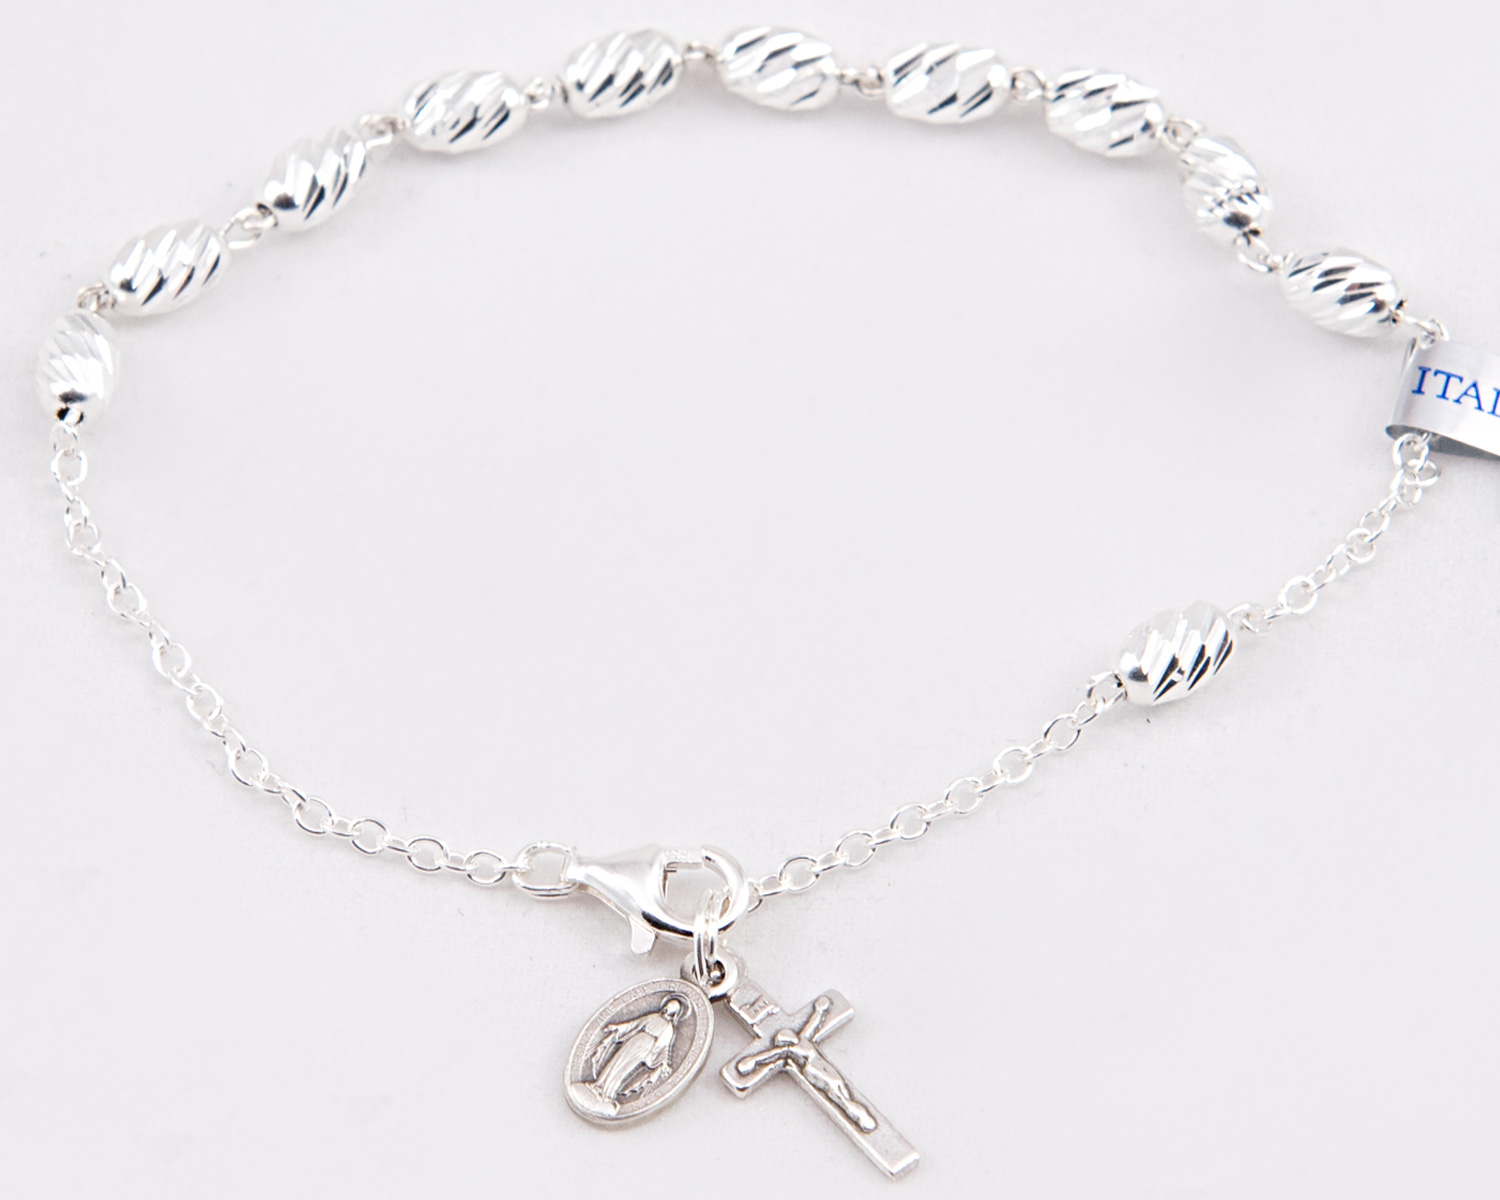 Up To 83% Off on Italian Sterling Silver Rosar... | Groupon Goods